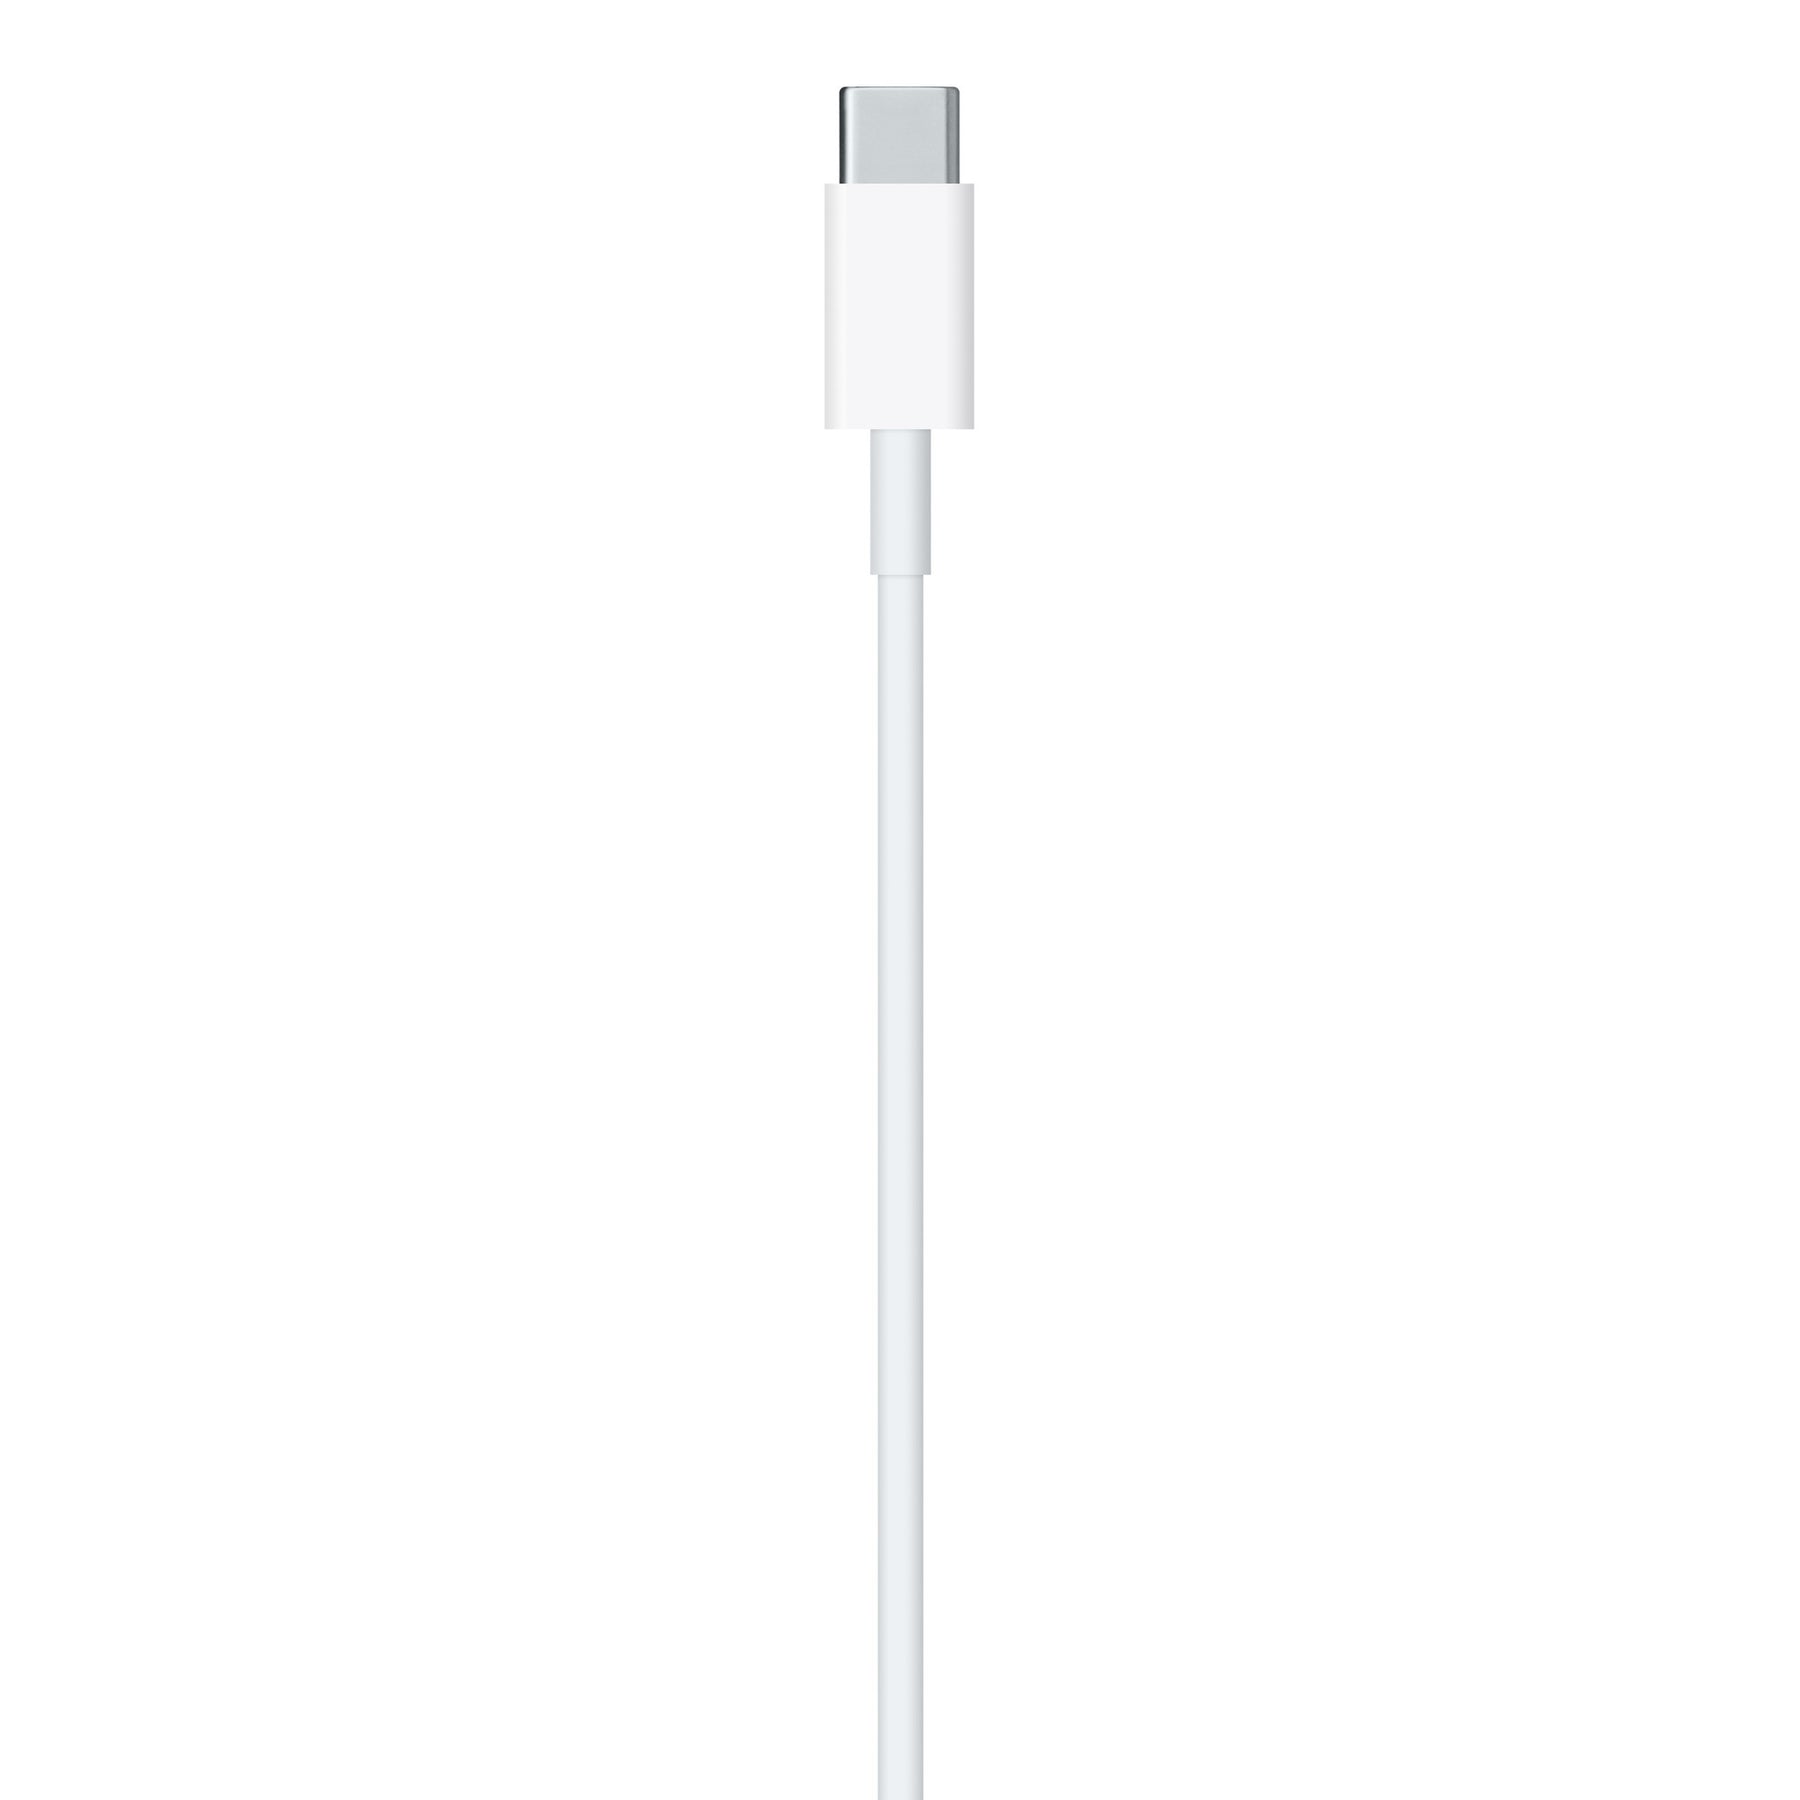 Apple Usb C To Lightning Cable (1m)